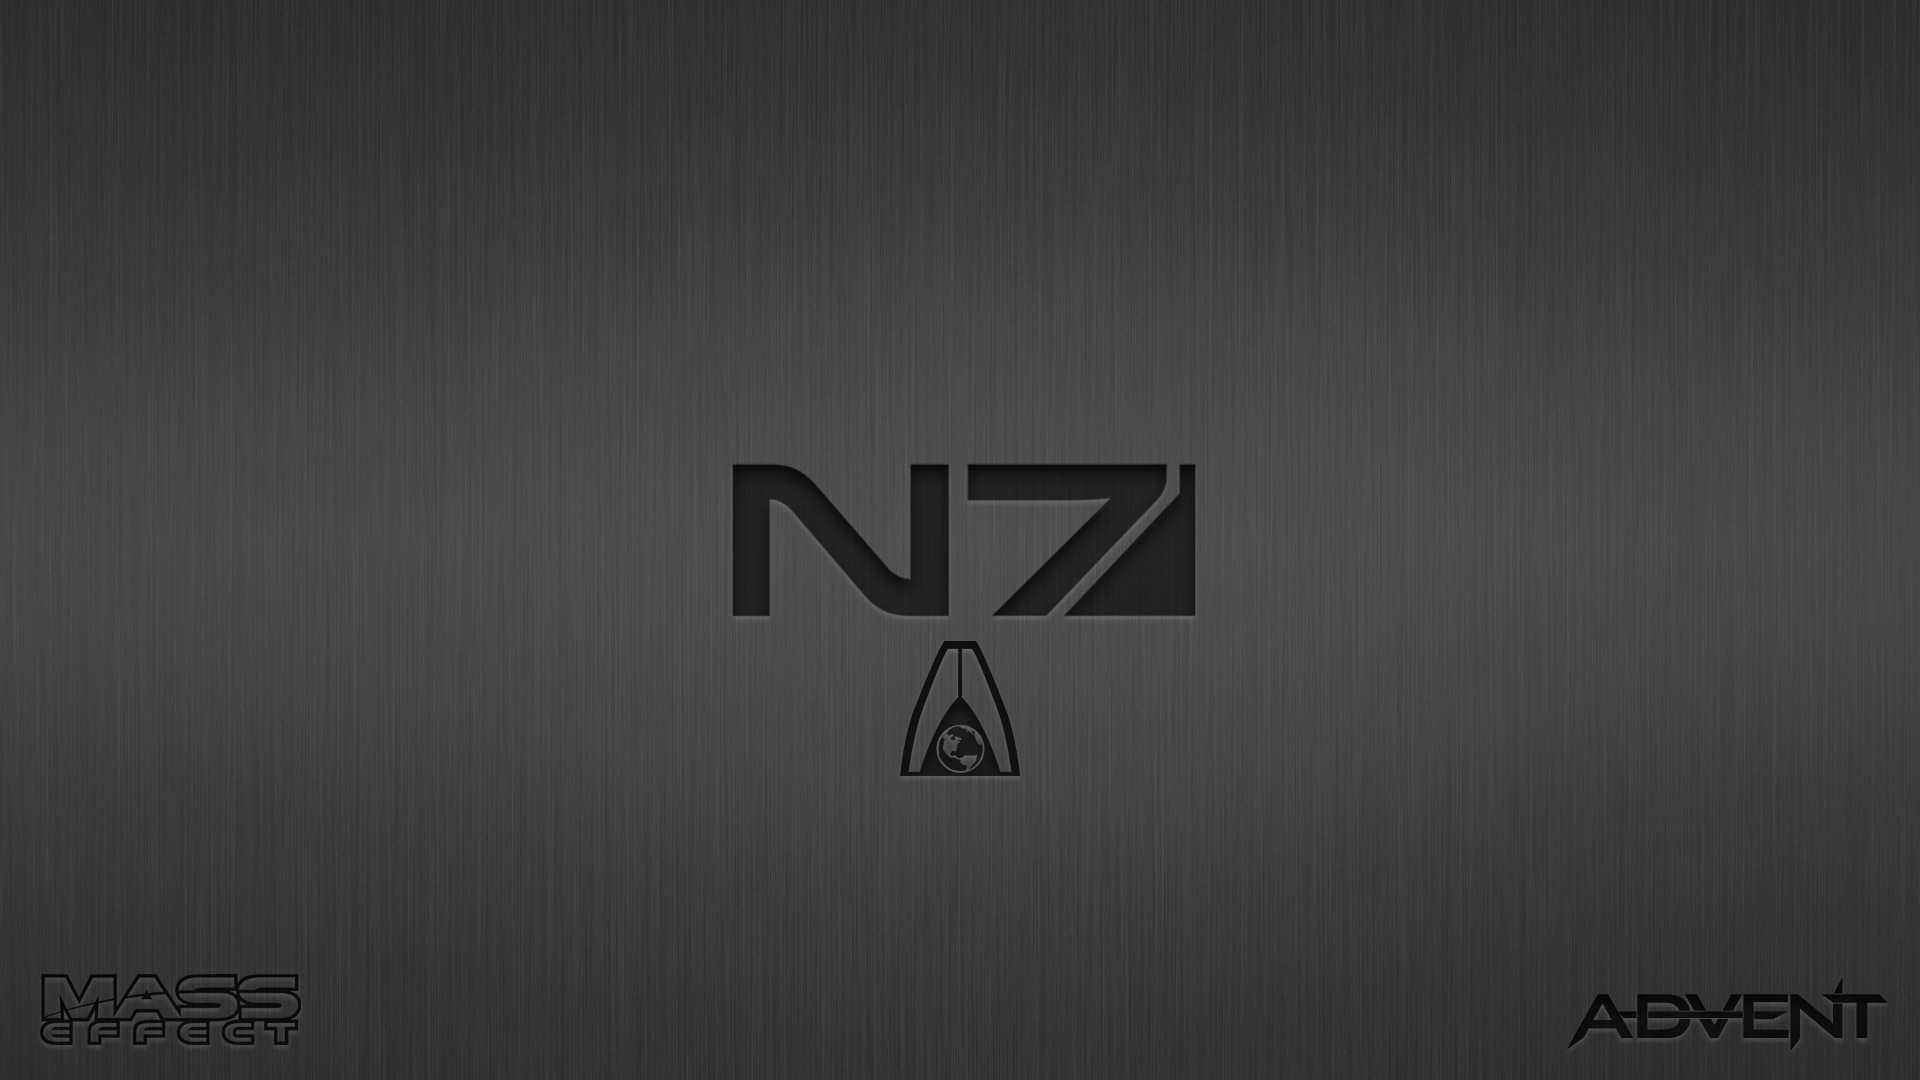 N7Day Wallpaper - Mass Effect - Advent Designs by AdventDesigns on ...